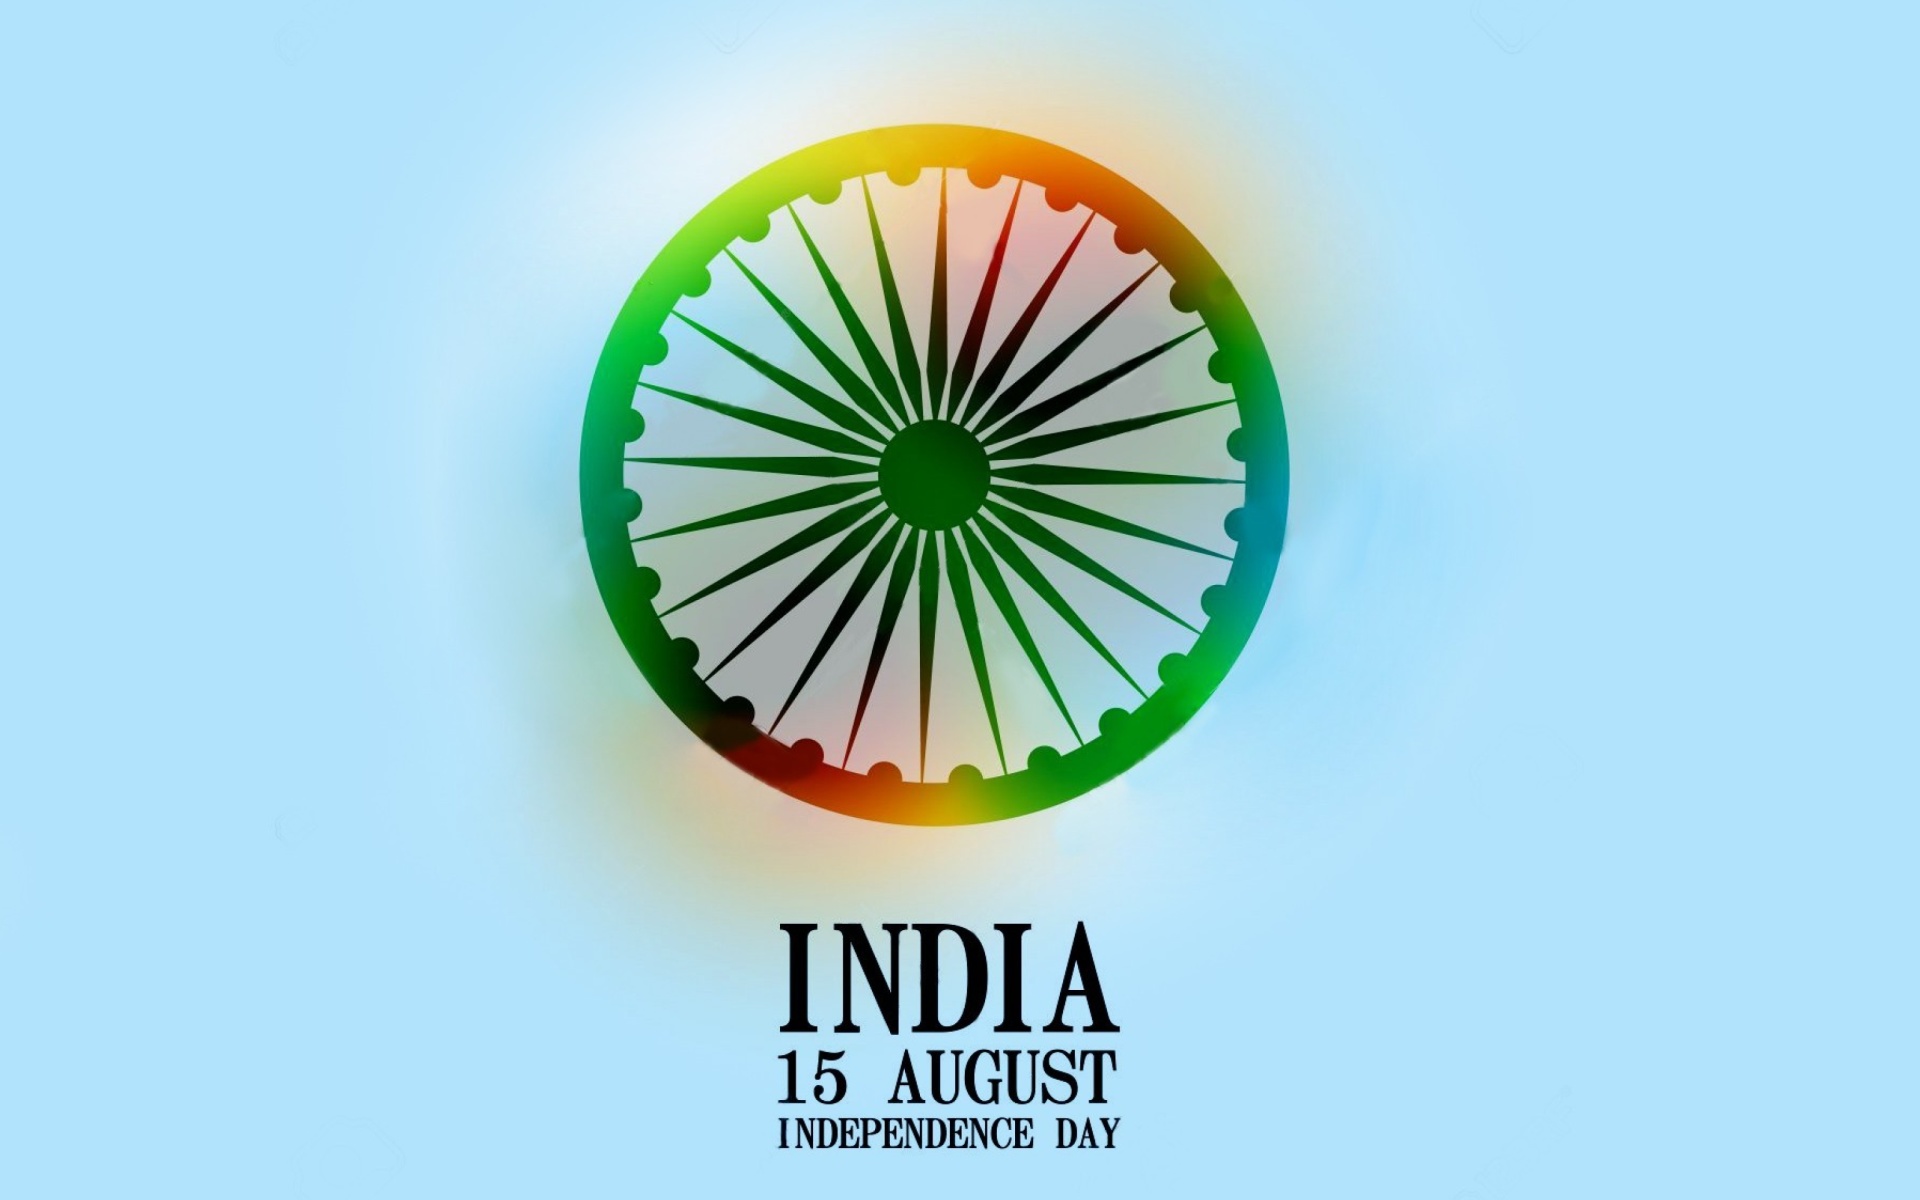 India Independence Day 15 August wallpaper 1920x1200